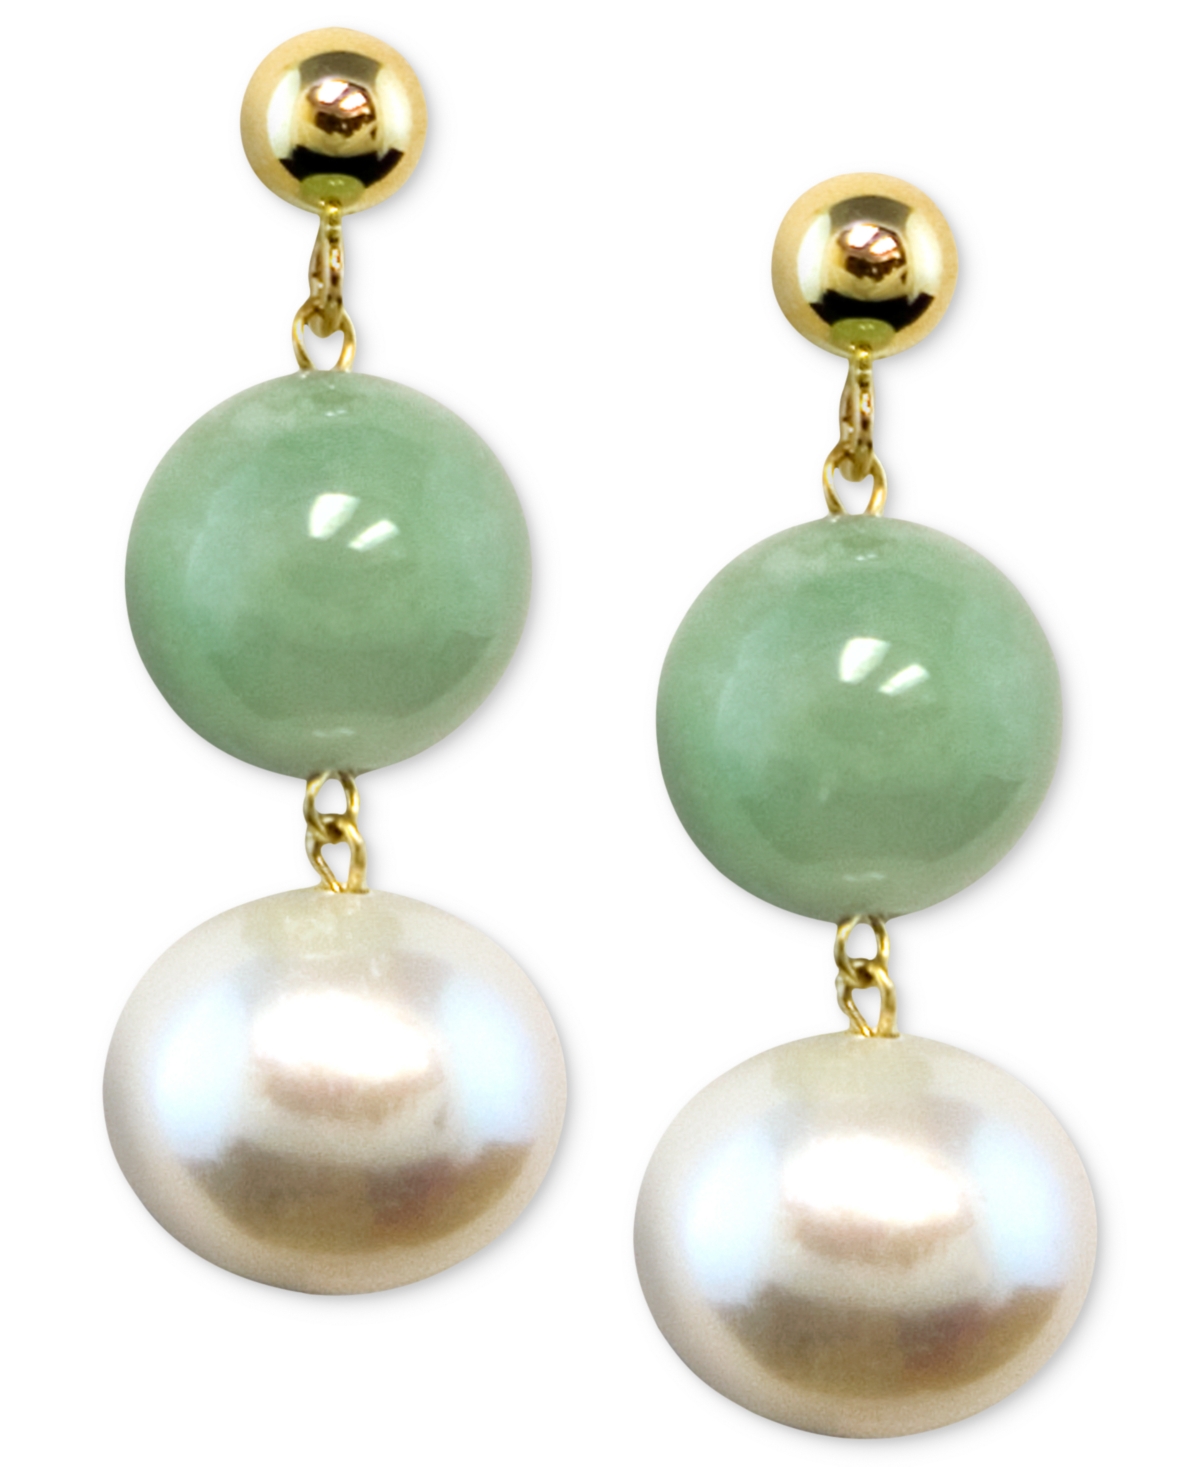 Details about   Lyns Jewelry Jade and Freshwater Pearl Drop Earrings Silver or Gold 